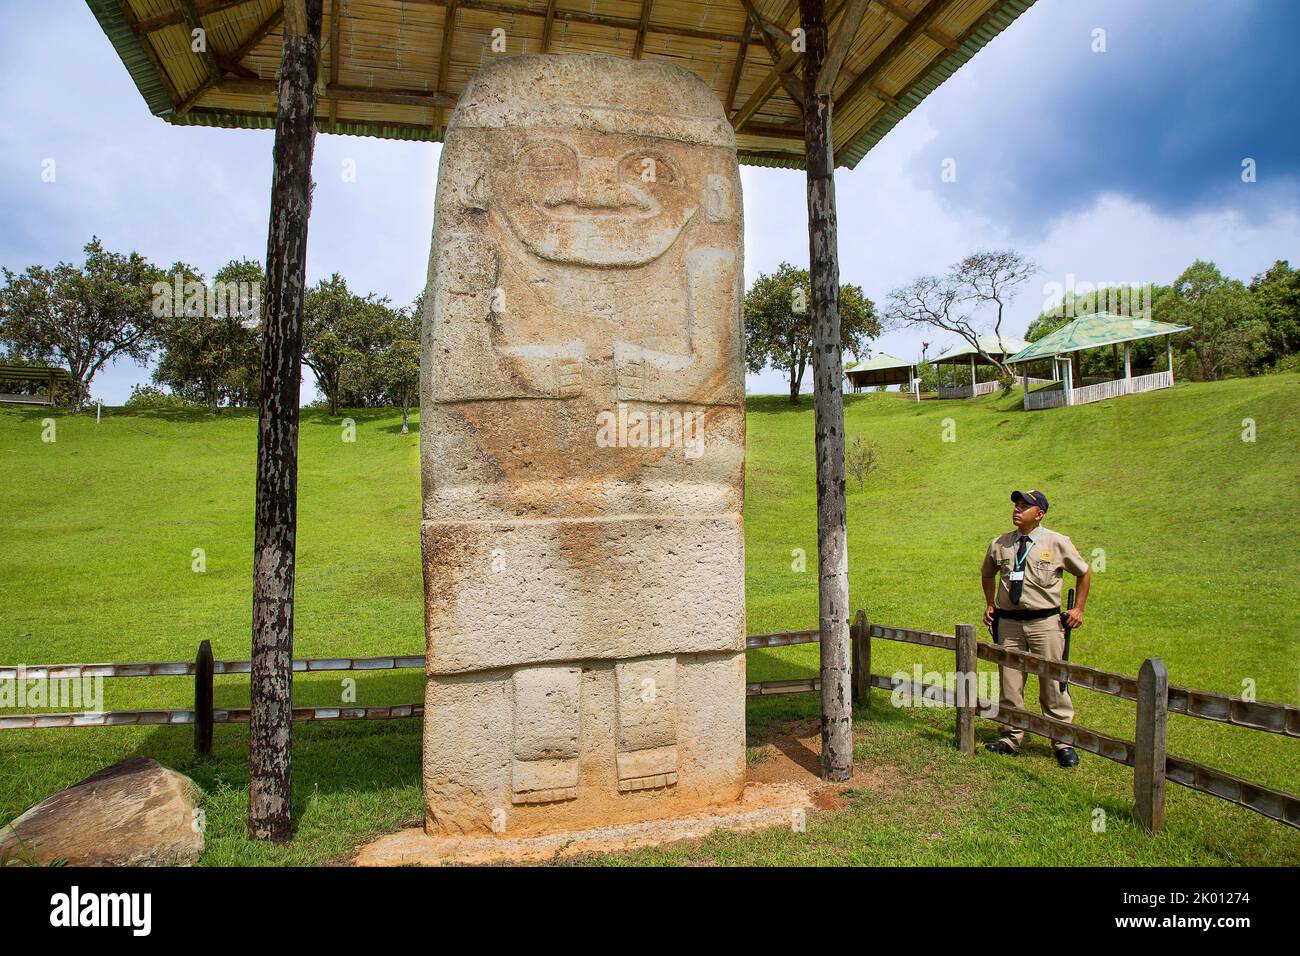 Colombia, Huila department, San Agustin region, this statue of 5 meters above and two meters in the ground is the largest of all sites around and is s Stock Photo